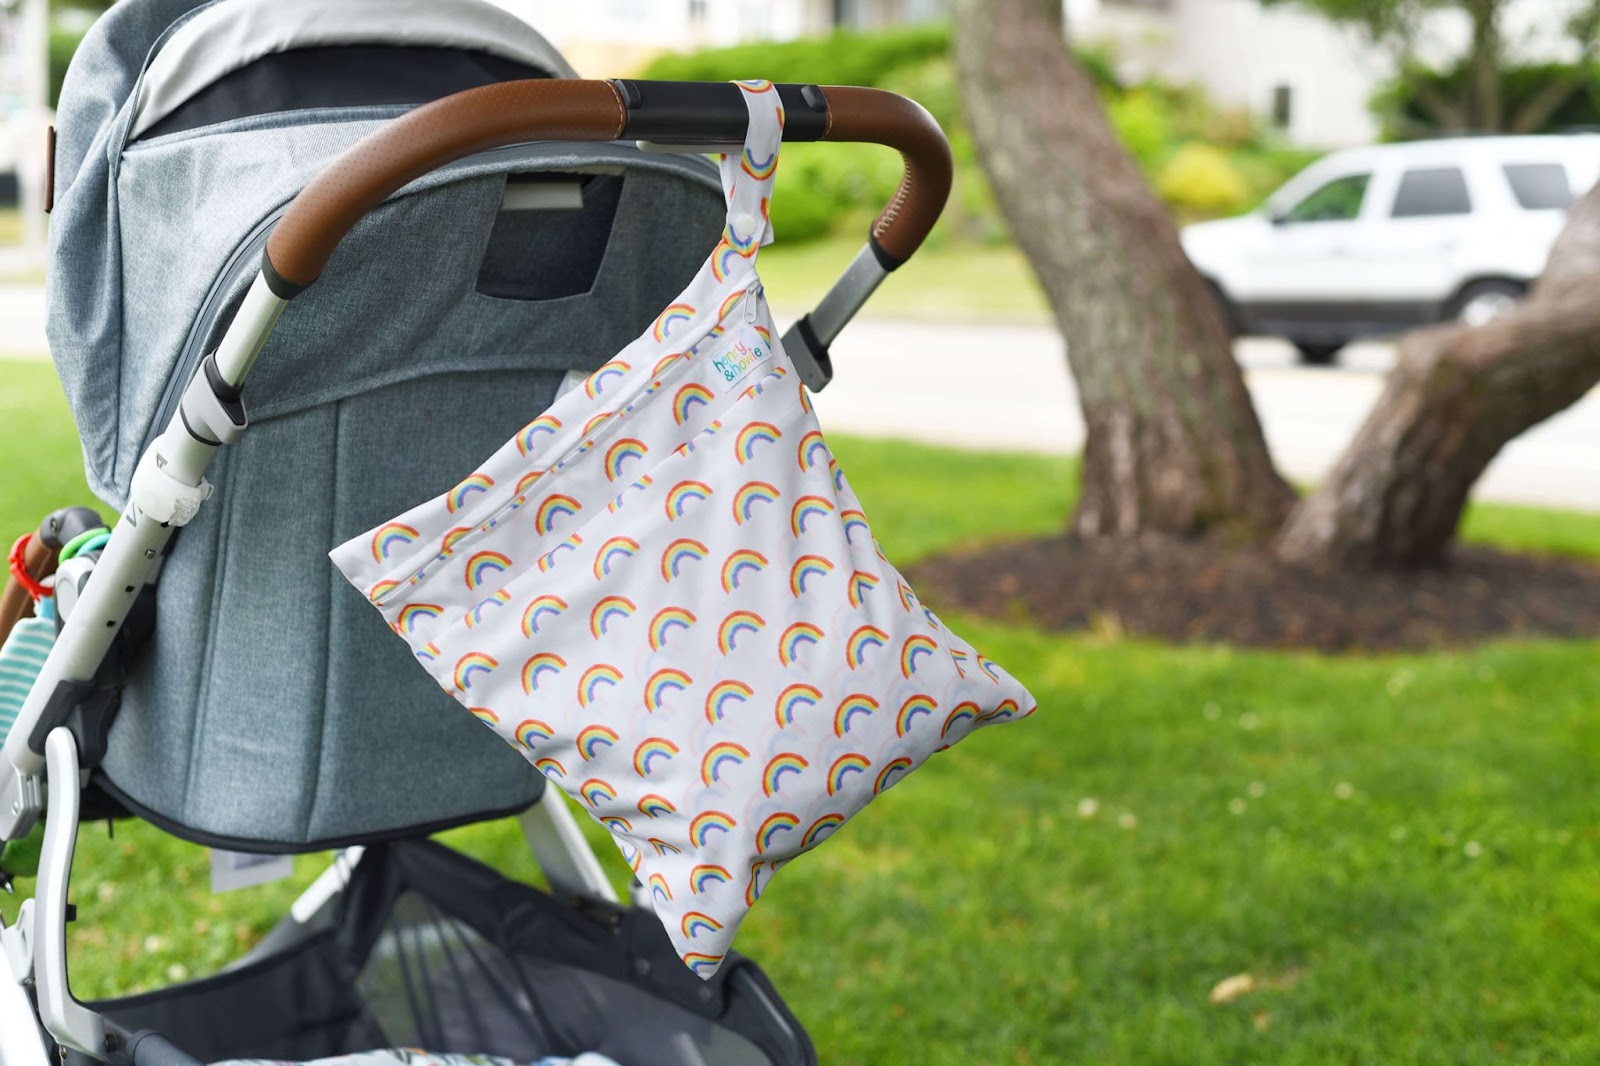 Making Cloth Diapering Cute Again With Henry and Howie–An image of a gray baby stroller on a patch of grass with a tree in the background. A Henry and Howie wet bag with a white background and colorful rainbow design is hanging off the handle of the stroller. 